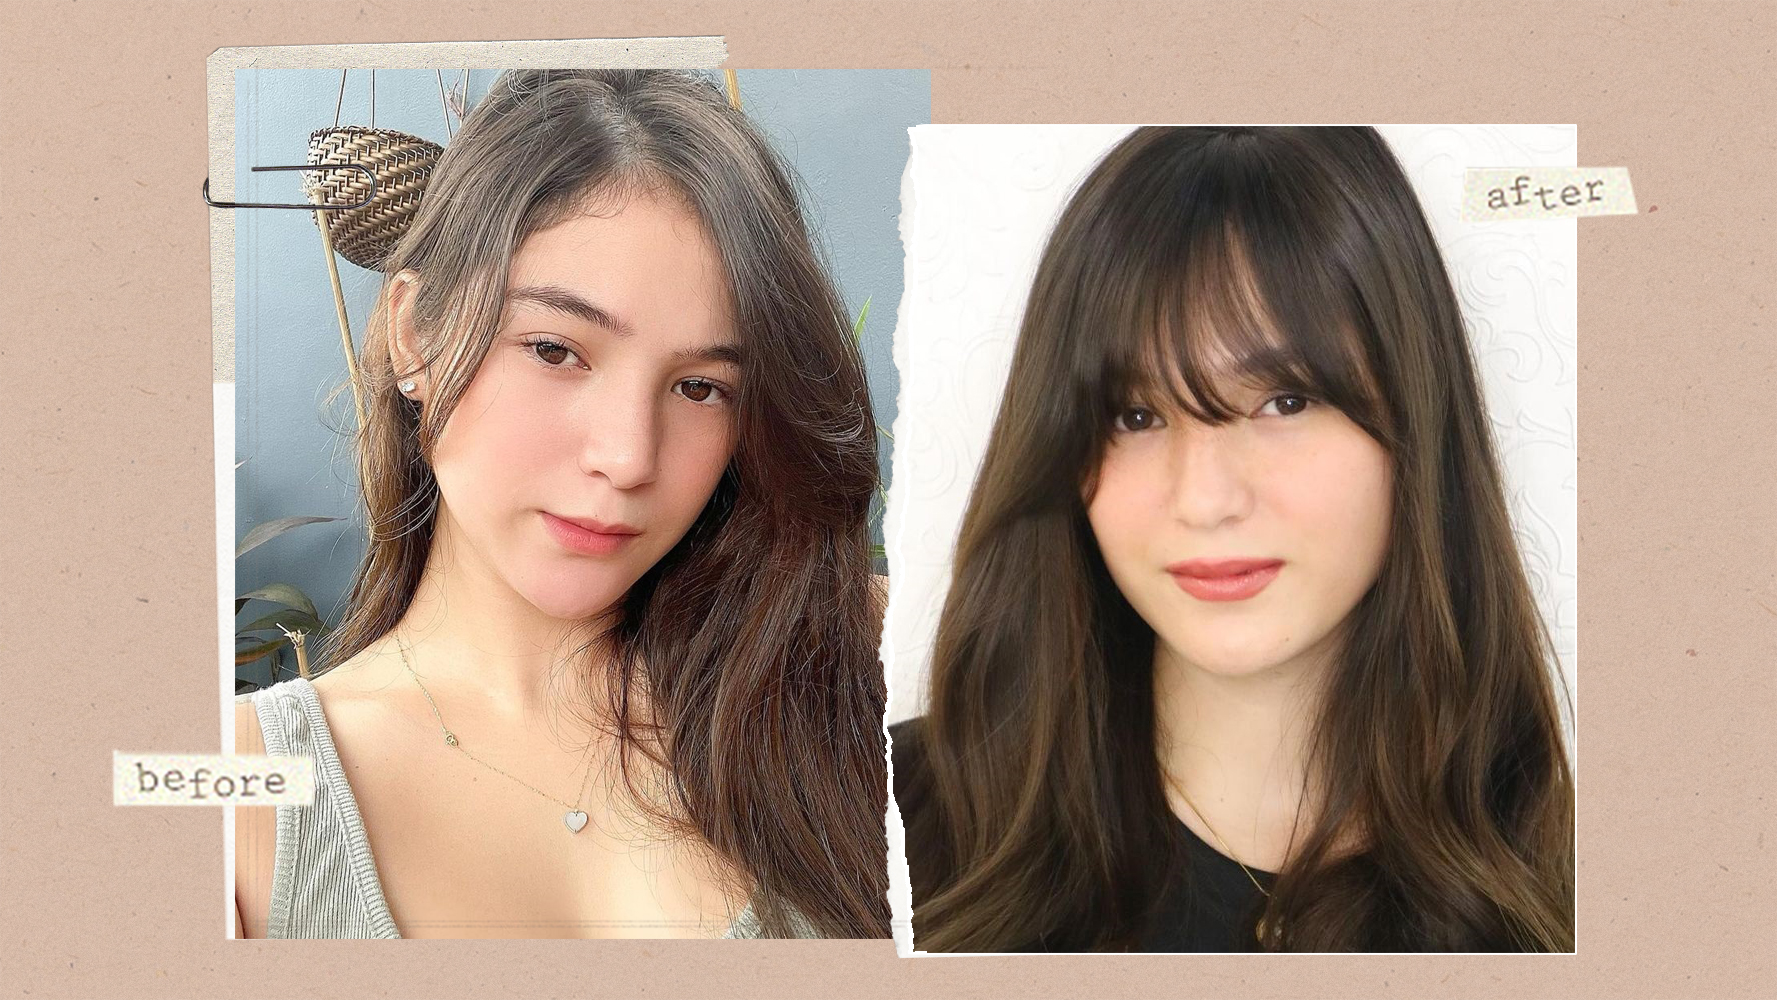 Barbie Imperial Just Got Wispy 'curtain Bangs' And Here's Why You Should Too